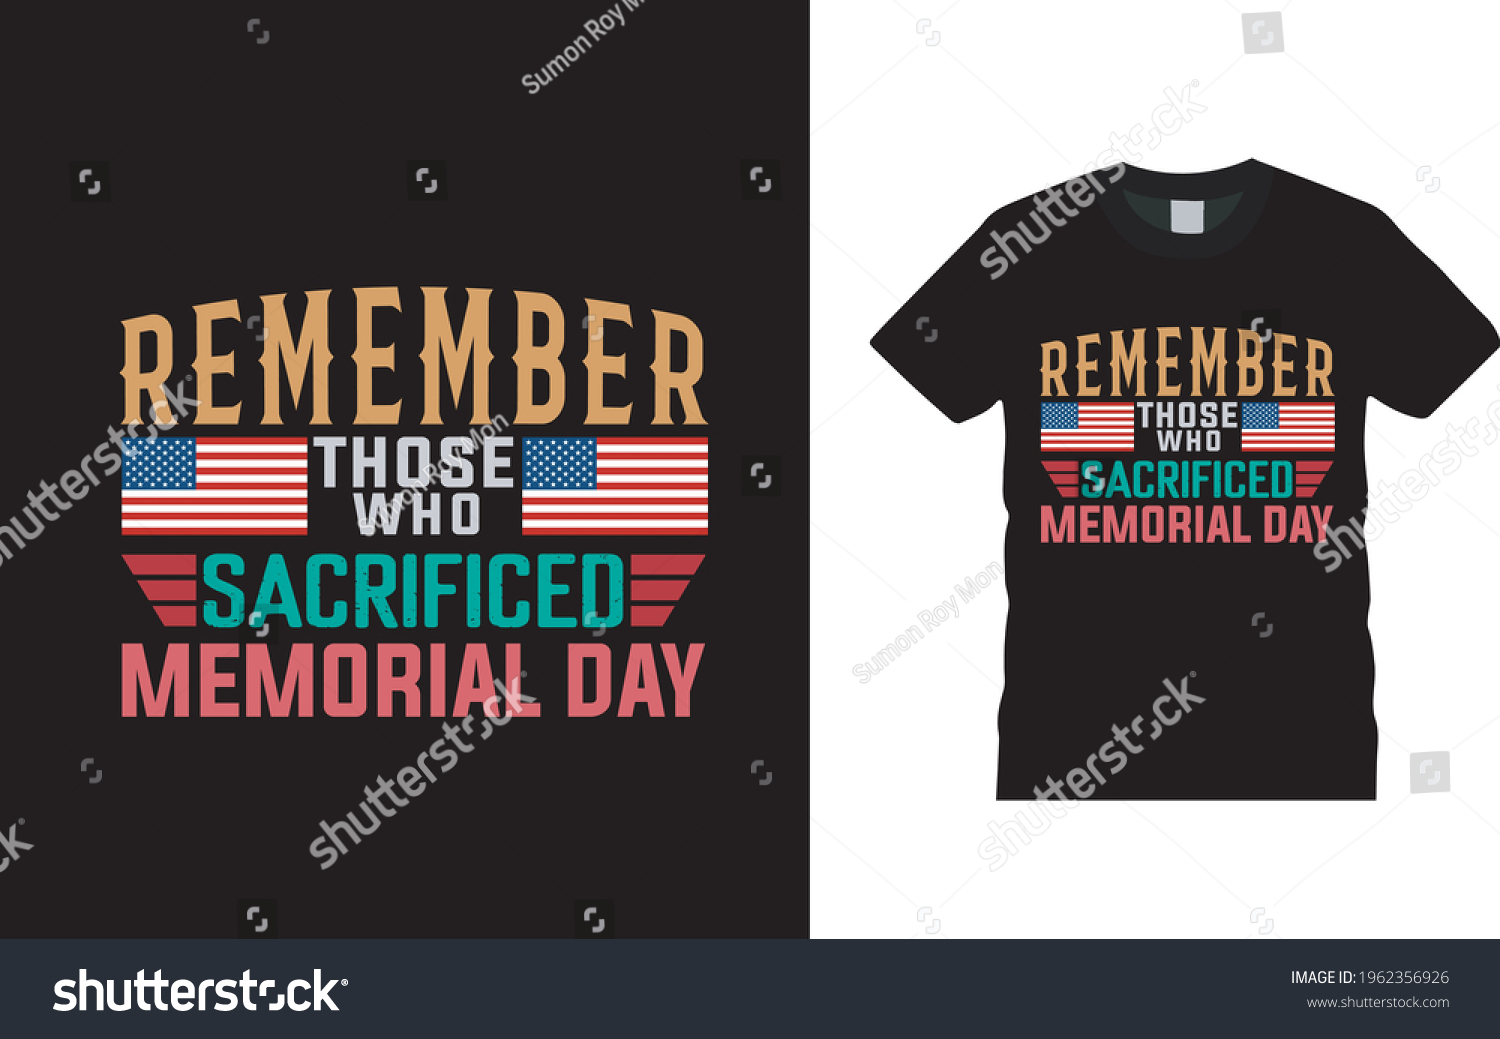 Remember Those Who Sacrificed Memorial Day Stock Vector Royalty Free 1962356926